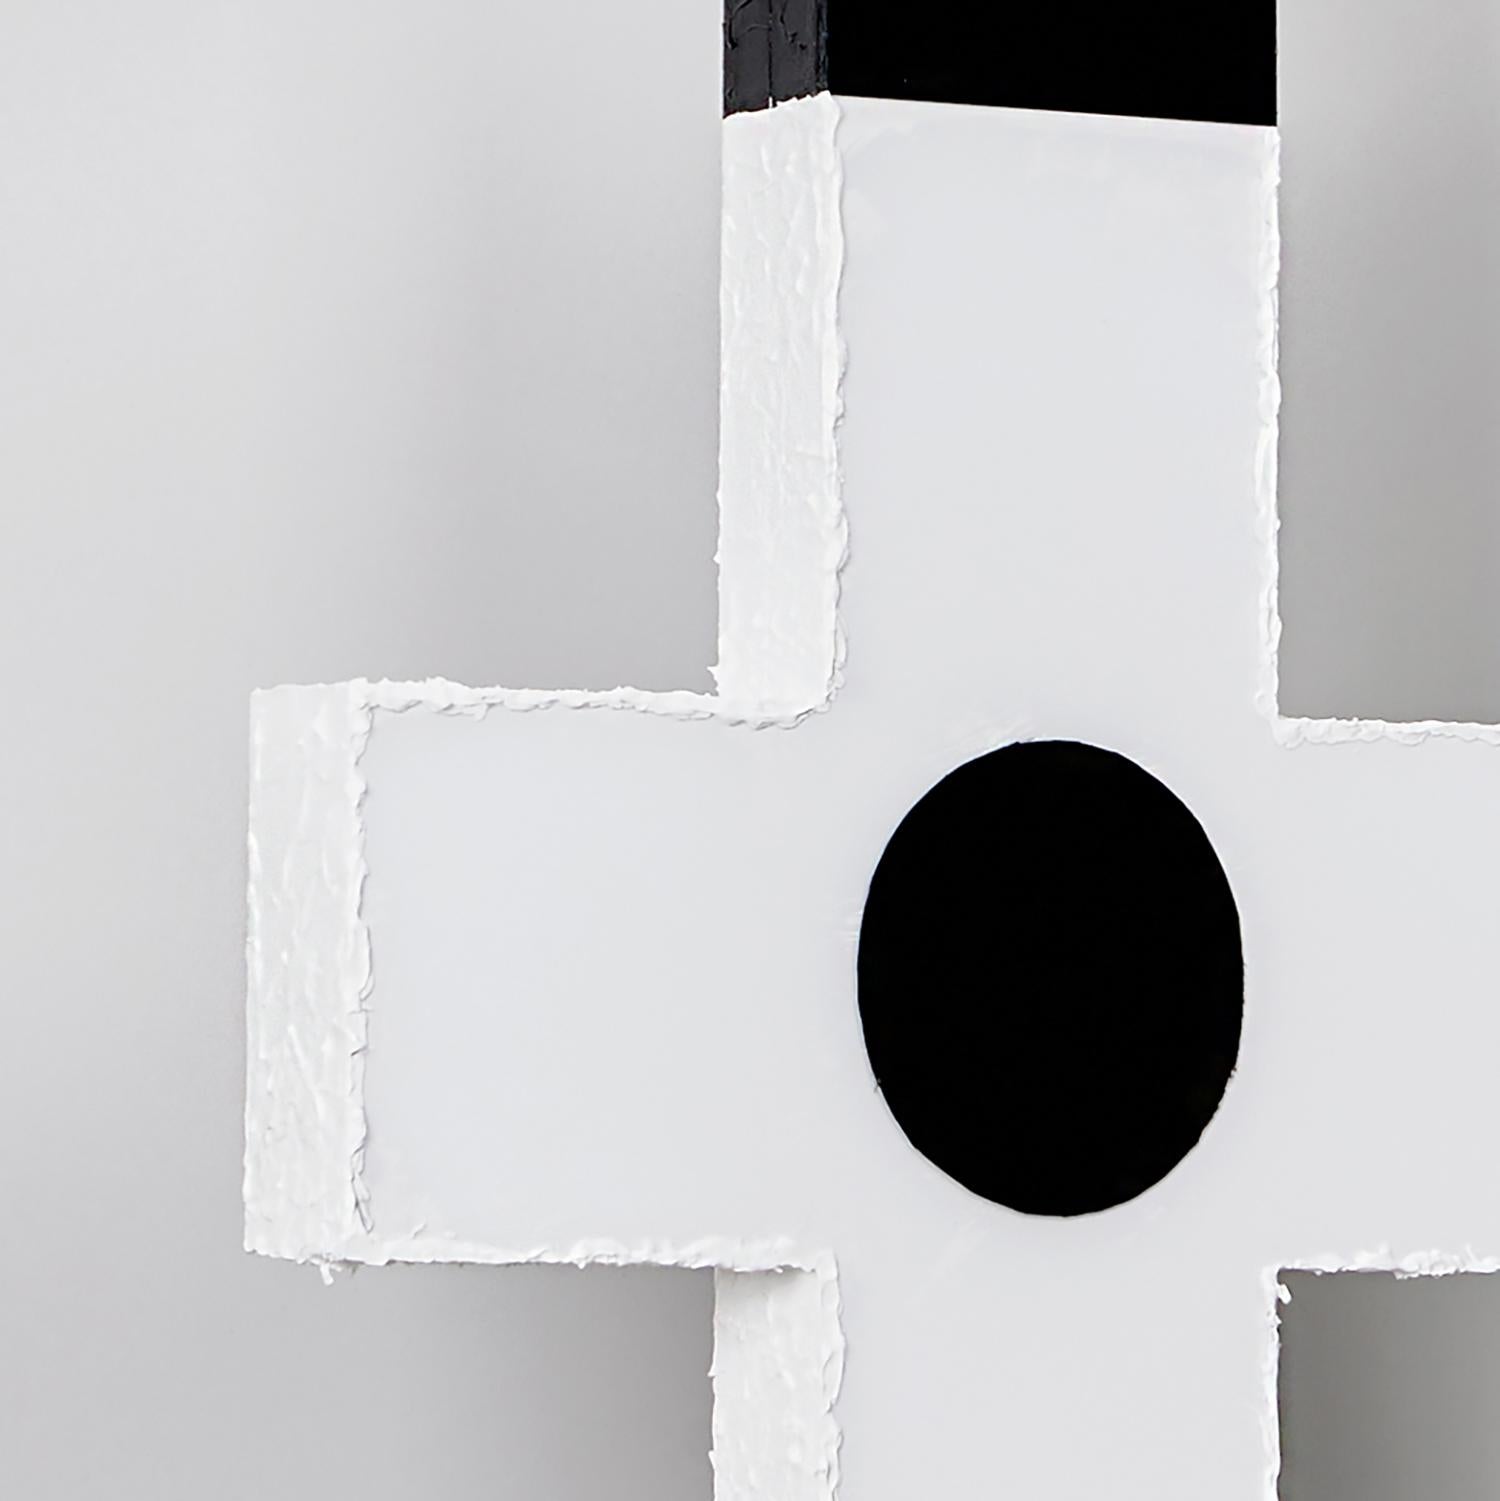 Steve Sangapore’s “I'm Neither Good Nor Evil, Or I'm Both” is a 44 x 13.5 x 1.75 inch mixed media wall-hung sculpture from his Modern Icon series. The black and white mixed media sculpture is a double cross shape combined with the eastern Taoist